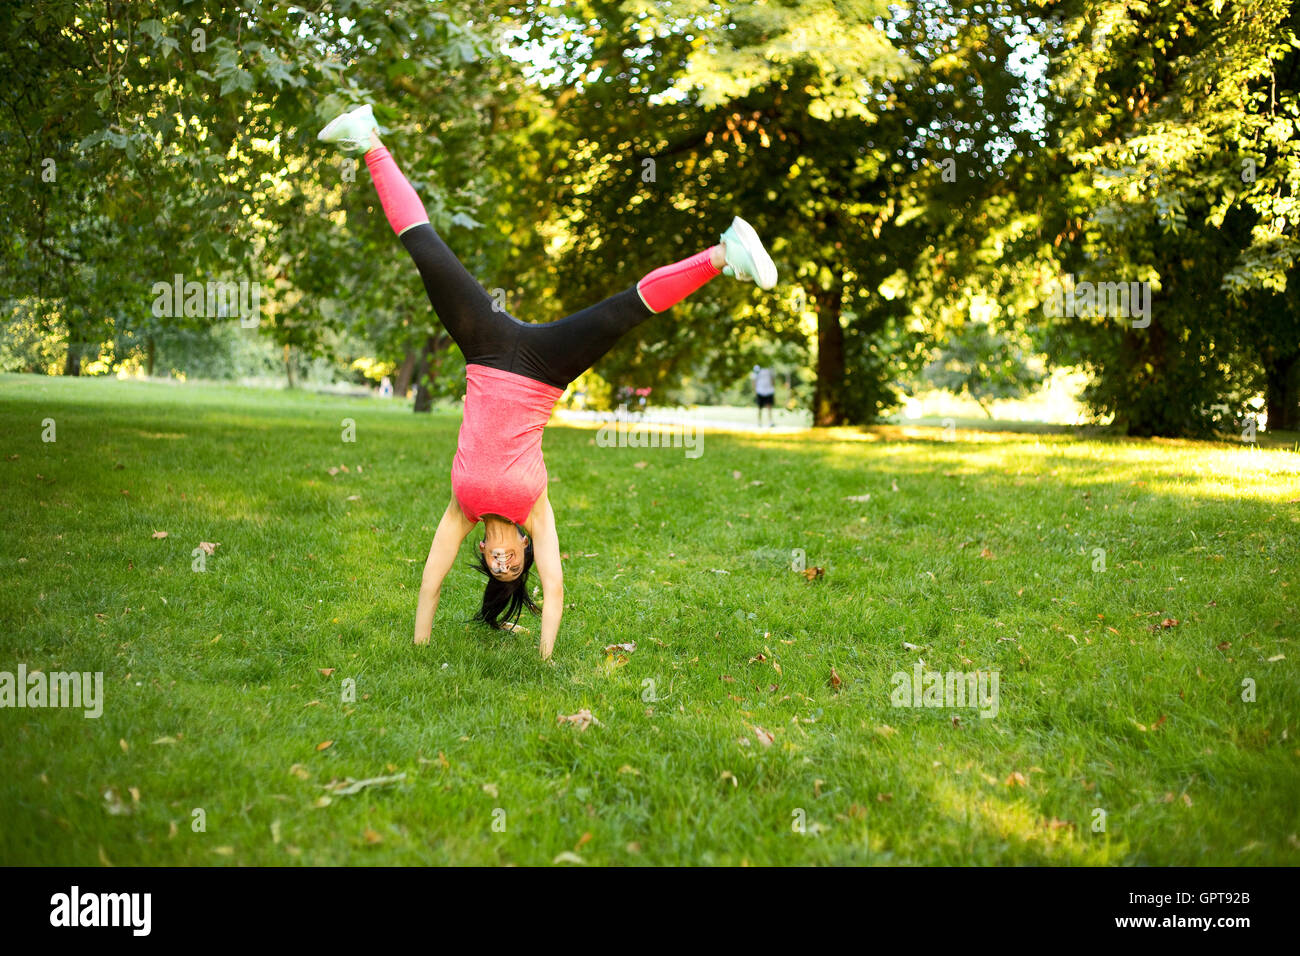 girl performing cartwheel in the park Stock Photo